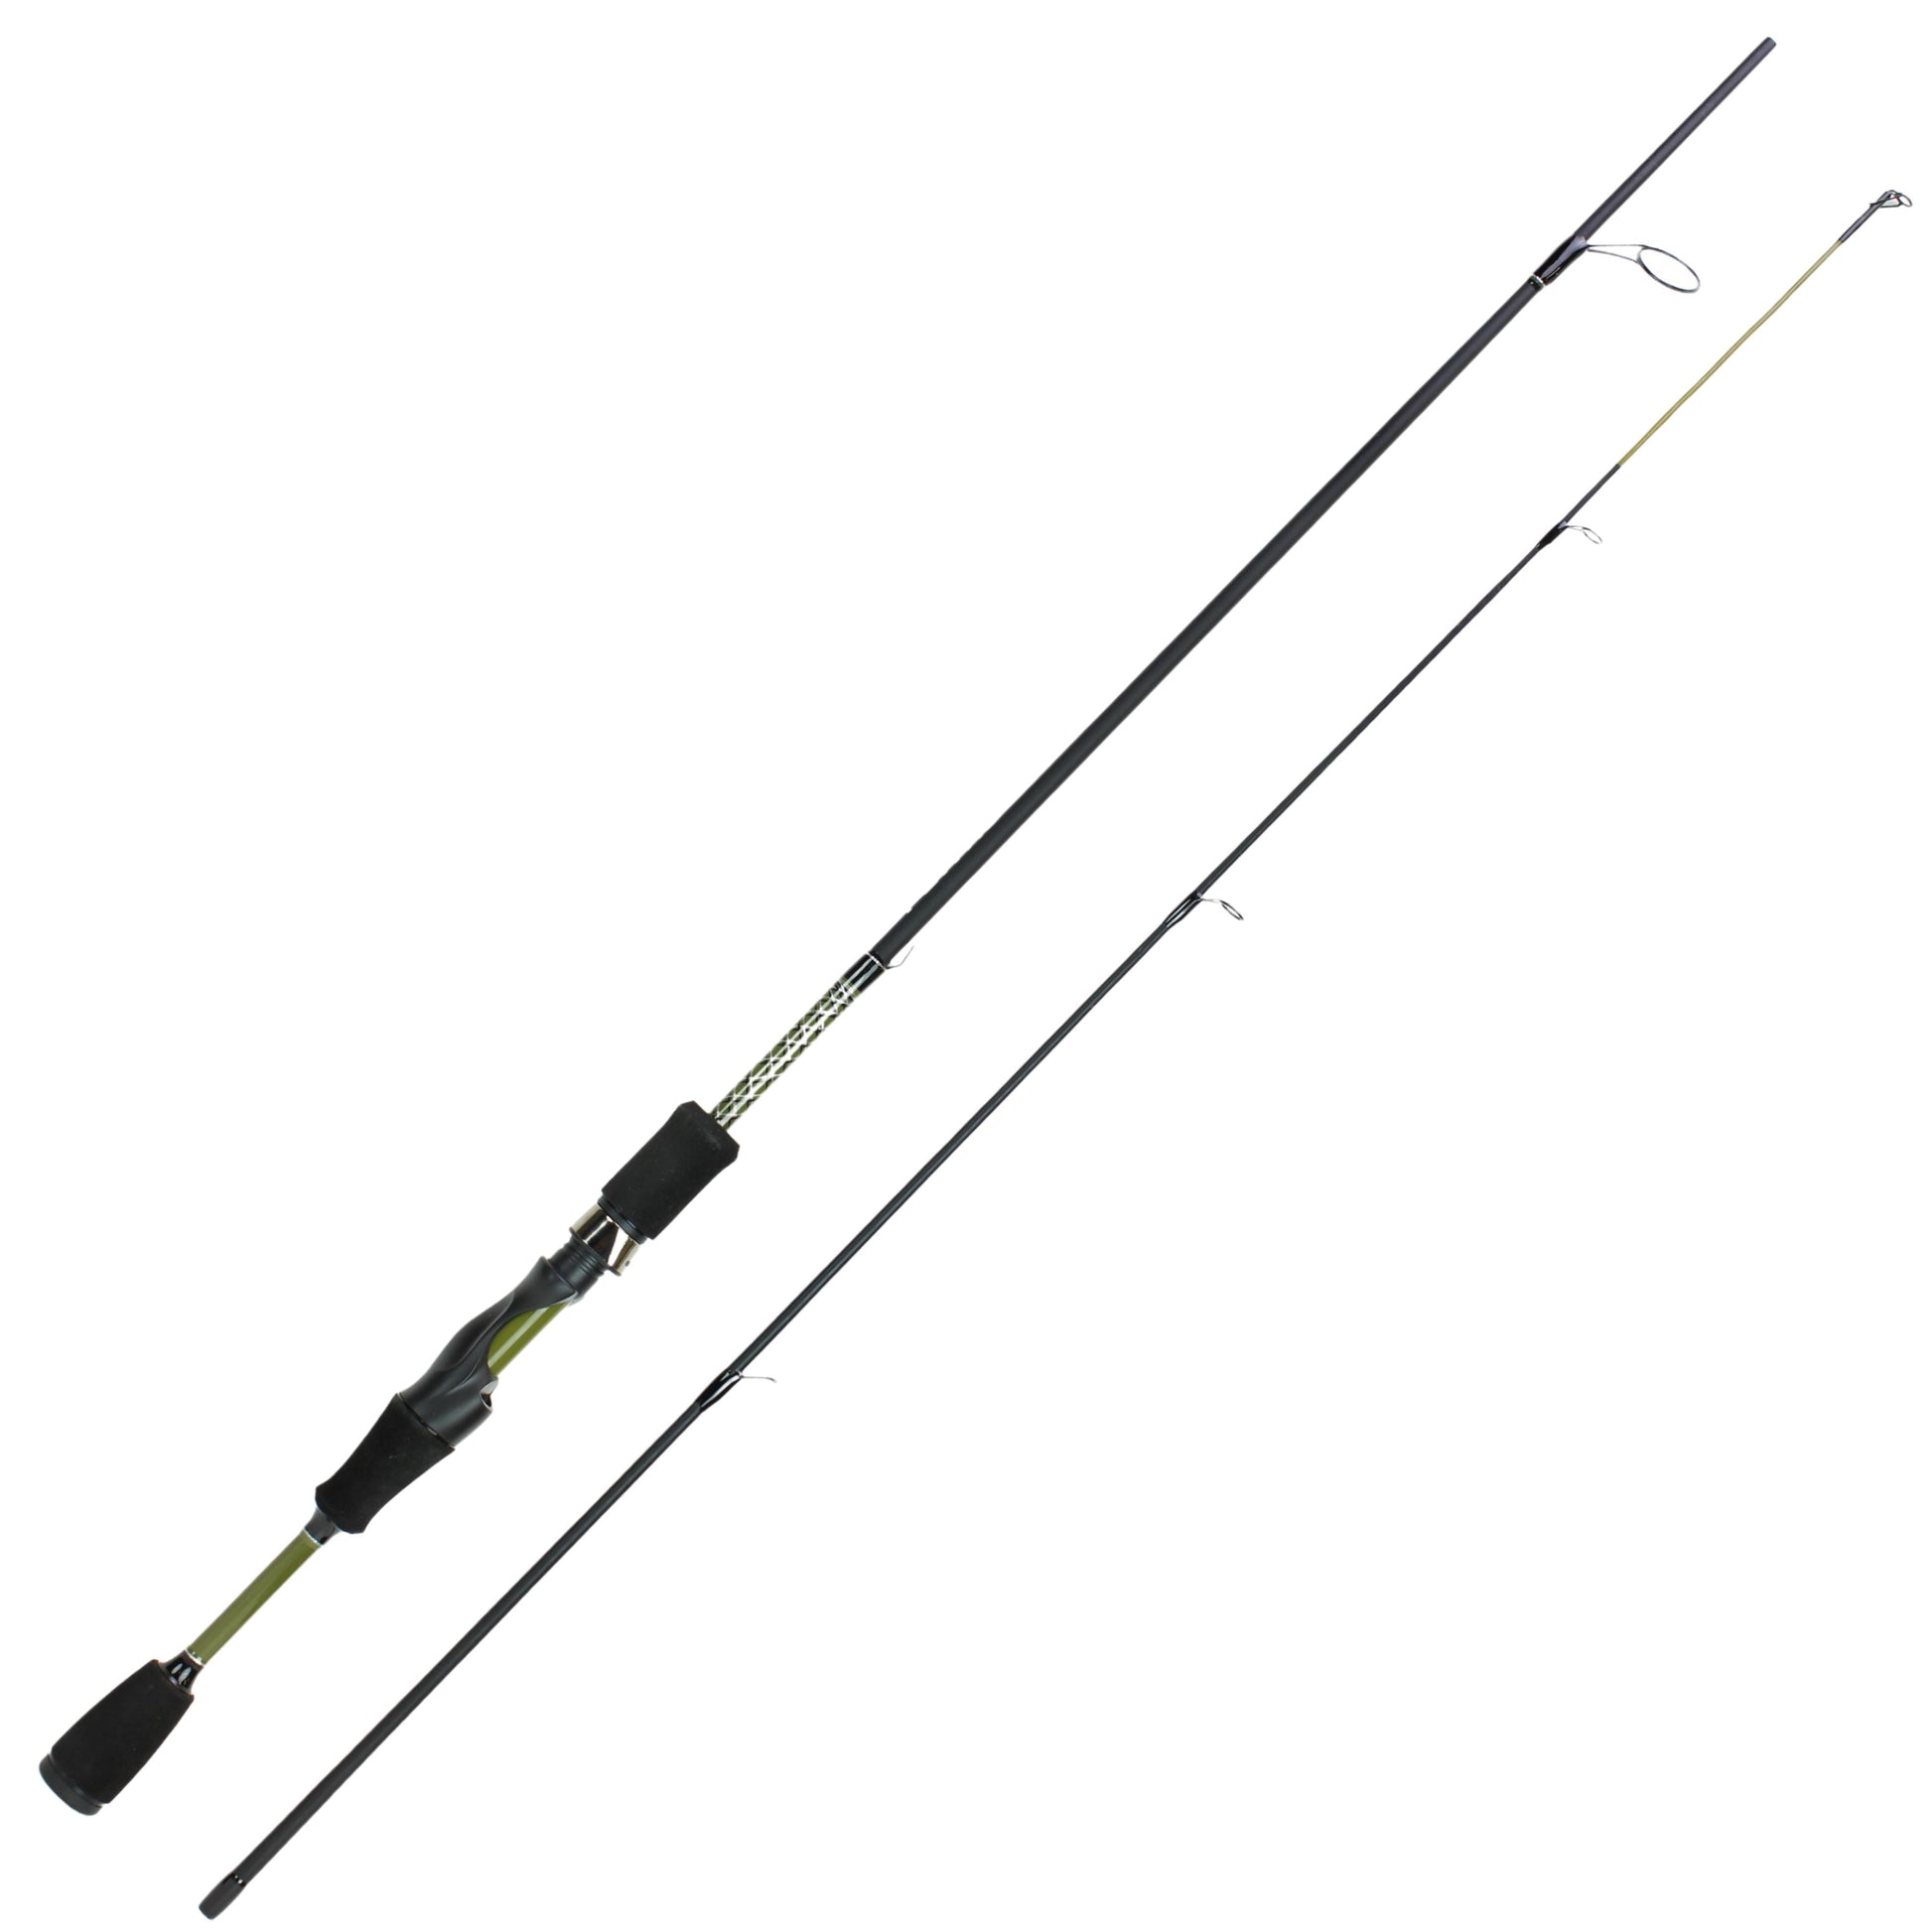 FORTIS 6' Medium Heavy Action 1 Piece Spinning Rod and 4000